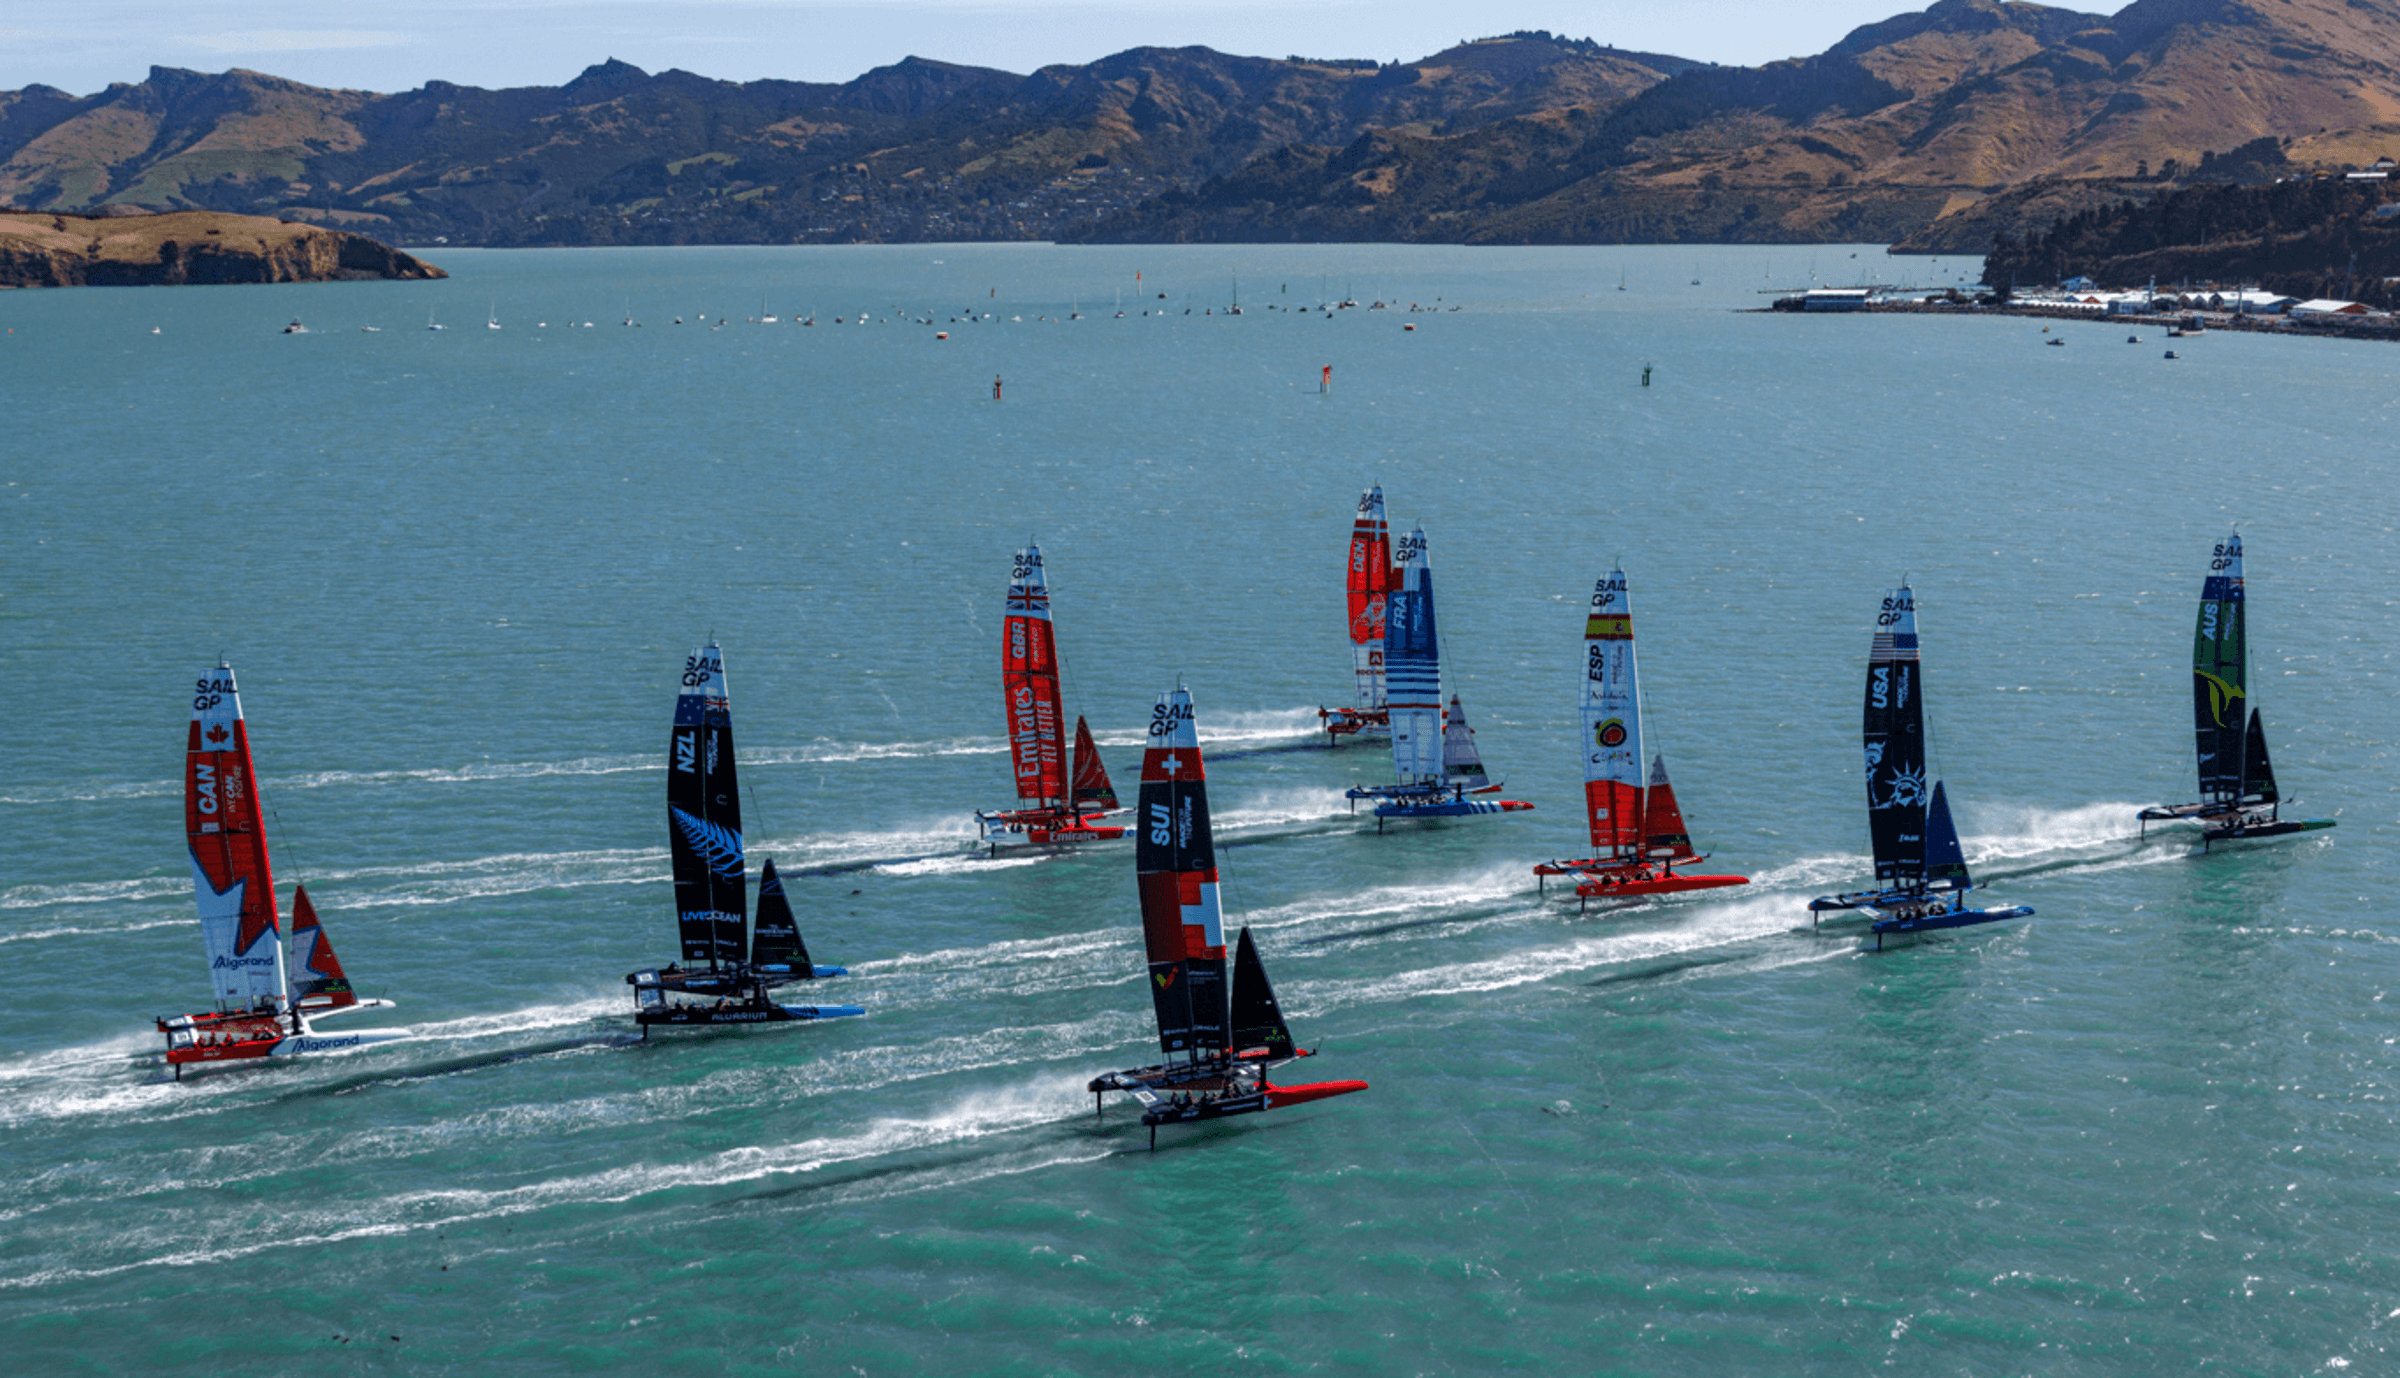 SailGP Boats On The Water